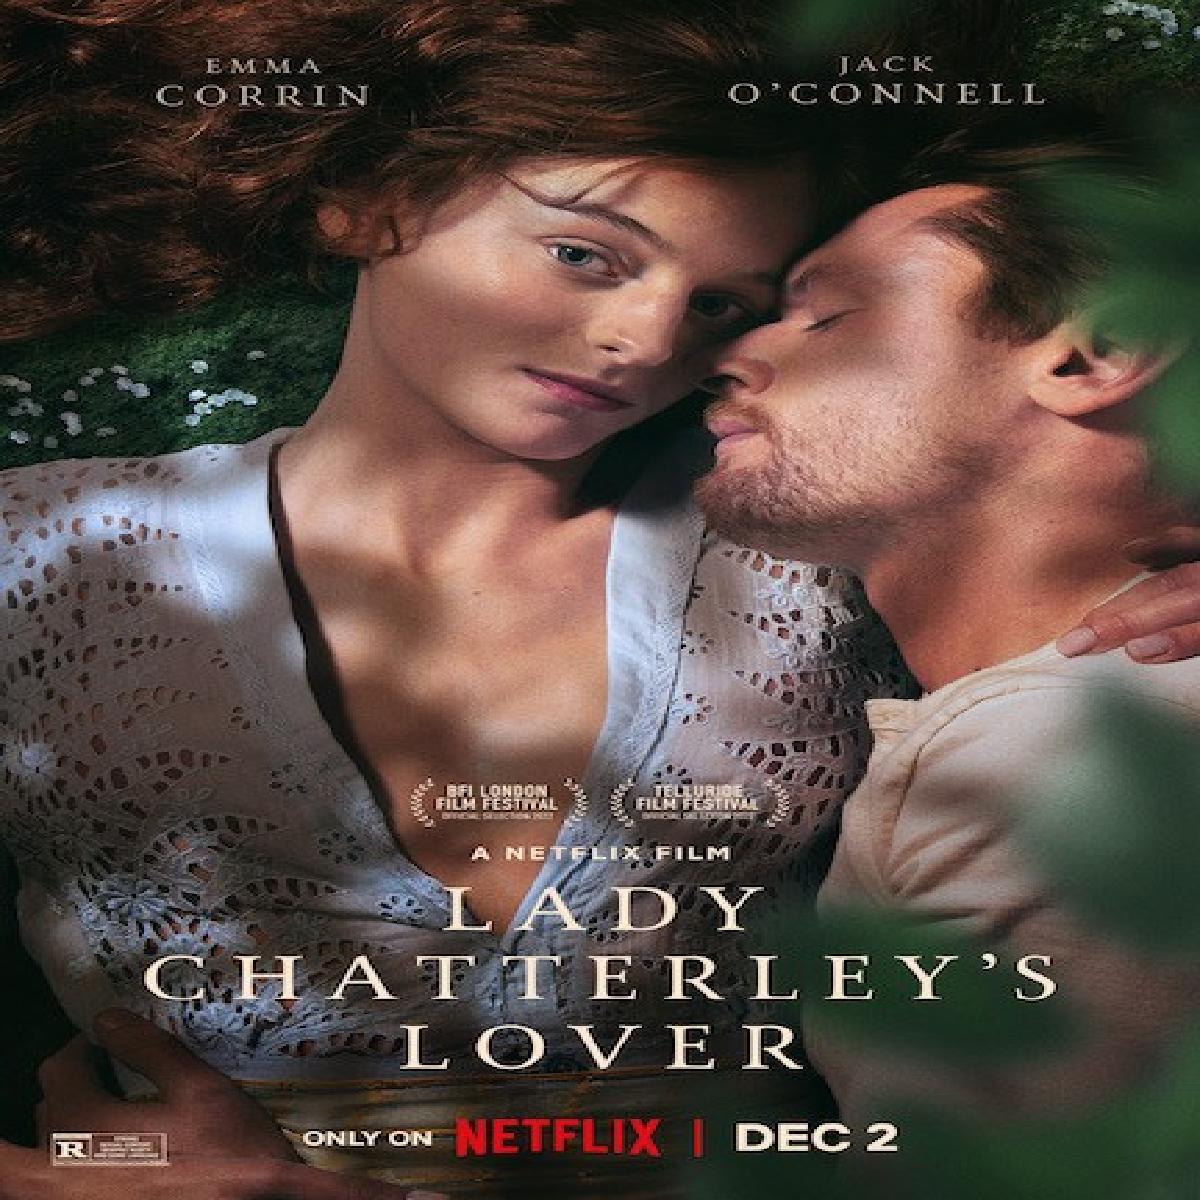 Lady Chatterley's Lover Trailer Is Out